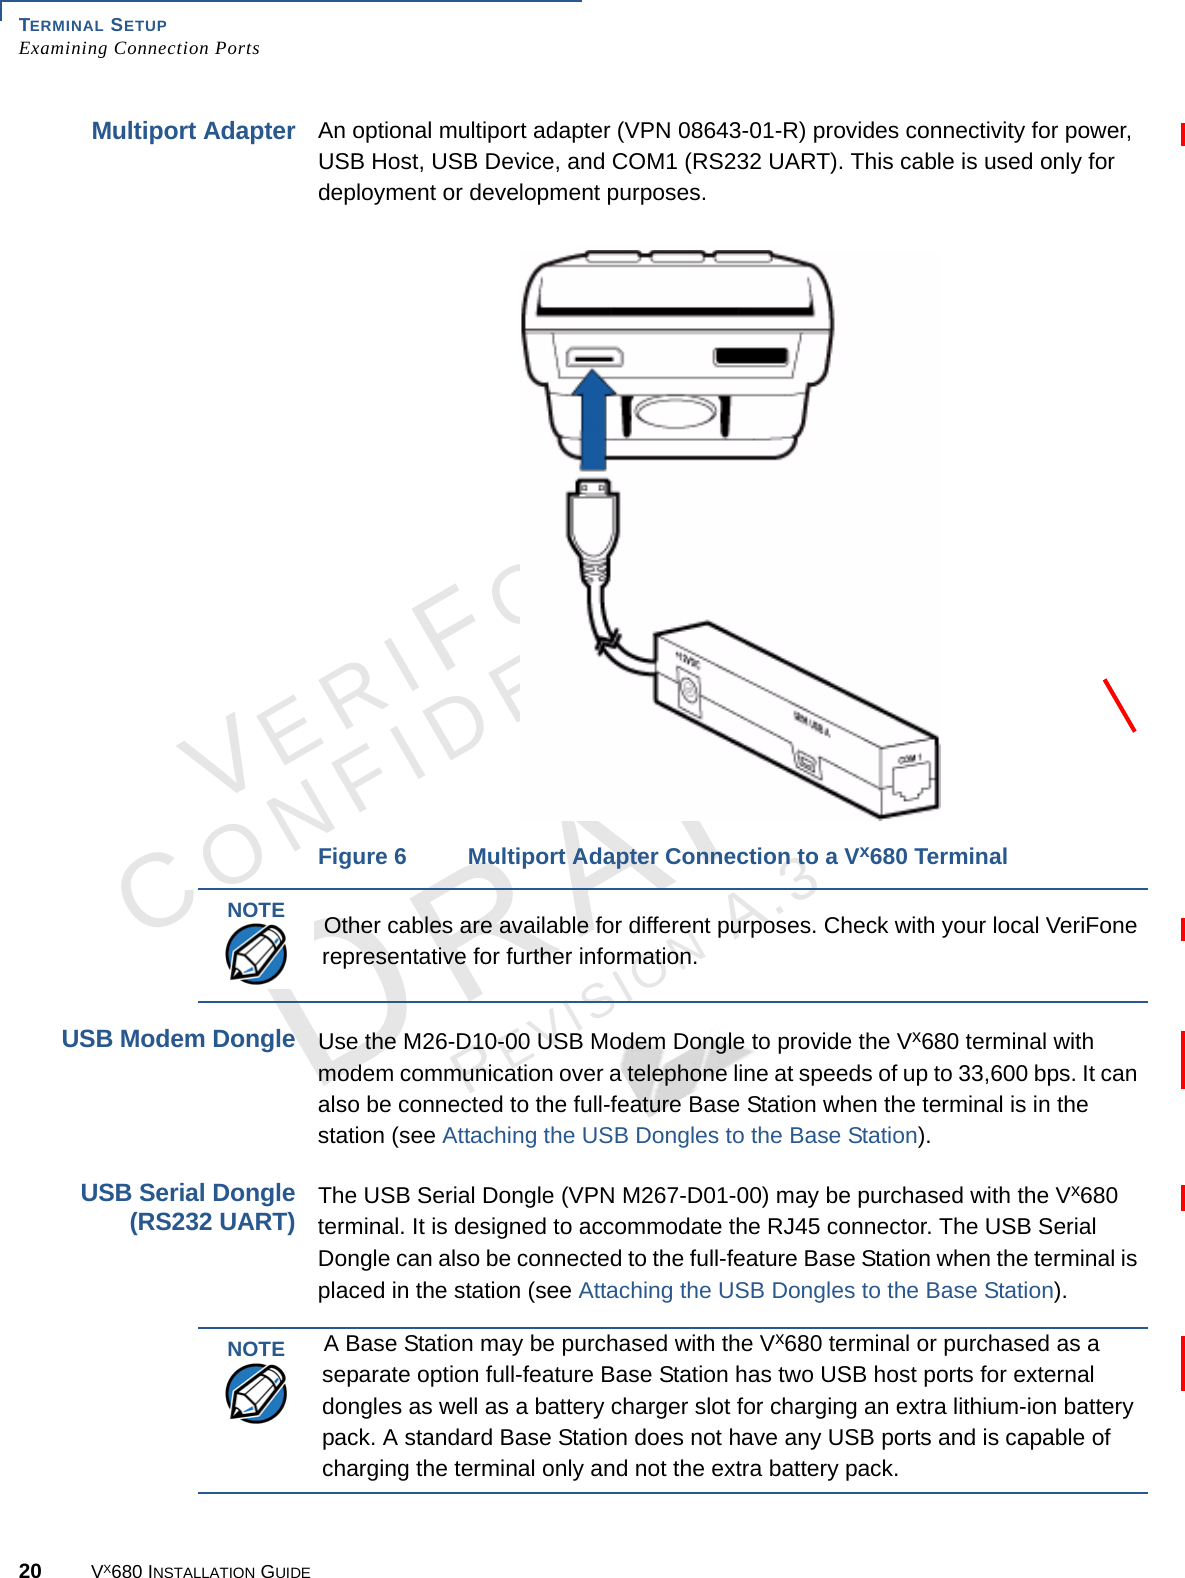 TERMINAL SETUPExamining Connection Ports20 VX680 INSTALLATION GUIDEVERIFONECONFIDENTIALREVISION A.3 Multiport AdapterAn optional multiport adapter (VPN 08643-01-R) provides connectivity for power, USB Host, USB Device, and COM1 (RS232 UART). This cable is used only for deployment or development purposes.Figure 6 Multiport Adapter Connection to a Vx680 TerminalUSB Modem DongleUse the M26-D10-00 USB Modem Dongle to provide the Vx680 terminal with modem communication over a telephone line at speeds of up to 33,600 bps. It can also be connected to the full-feature Base Station when the terminal is in the station (see Attaching the USB Dongles to the Base Station). USB Serial Dongle(RS232 UART)The USB Serial Dongle (VPN M267-D01-00) may be purchased with the Vx680 terminal. It is designed to accommodate the RJ45 connector. The USB Serial Dongle can also be connected to the full-feature Base Station when the terminal is placed in the station (see Attaching the USB Dongles to the Base Station). NOTE Other cables are available for different purposes. Check with your local VeriFone representative for further information.NOTE A Base Station may be purchased with the Vx680 terminal or purchased as a separate option full-feature Base Station has two USB host ports for external dongles as well as a battery charger slot for charging an extra lithium-ion battery pack. A standard Base Station does not have any USB ports and is capable of charging the terminal only and not the extra battery pack. 